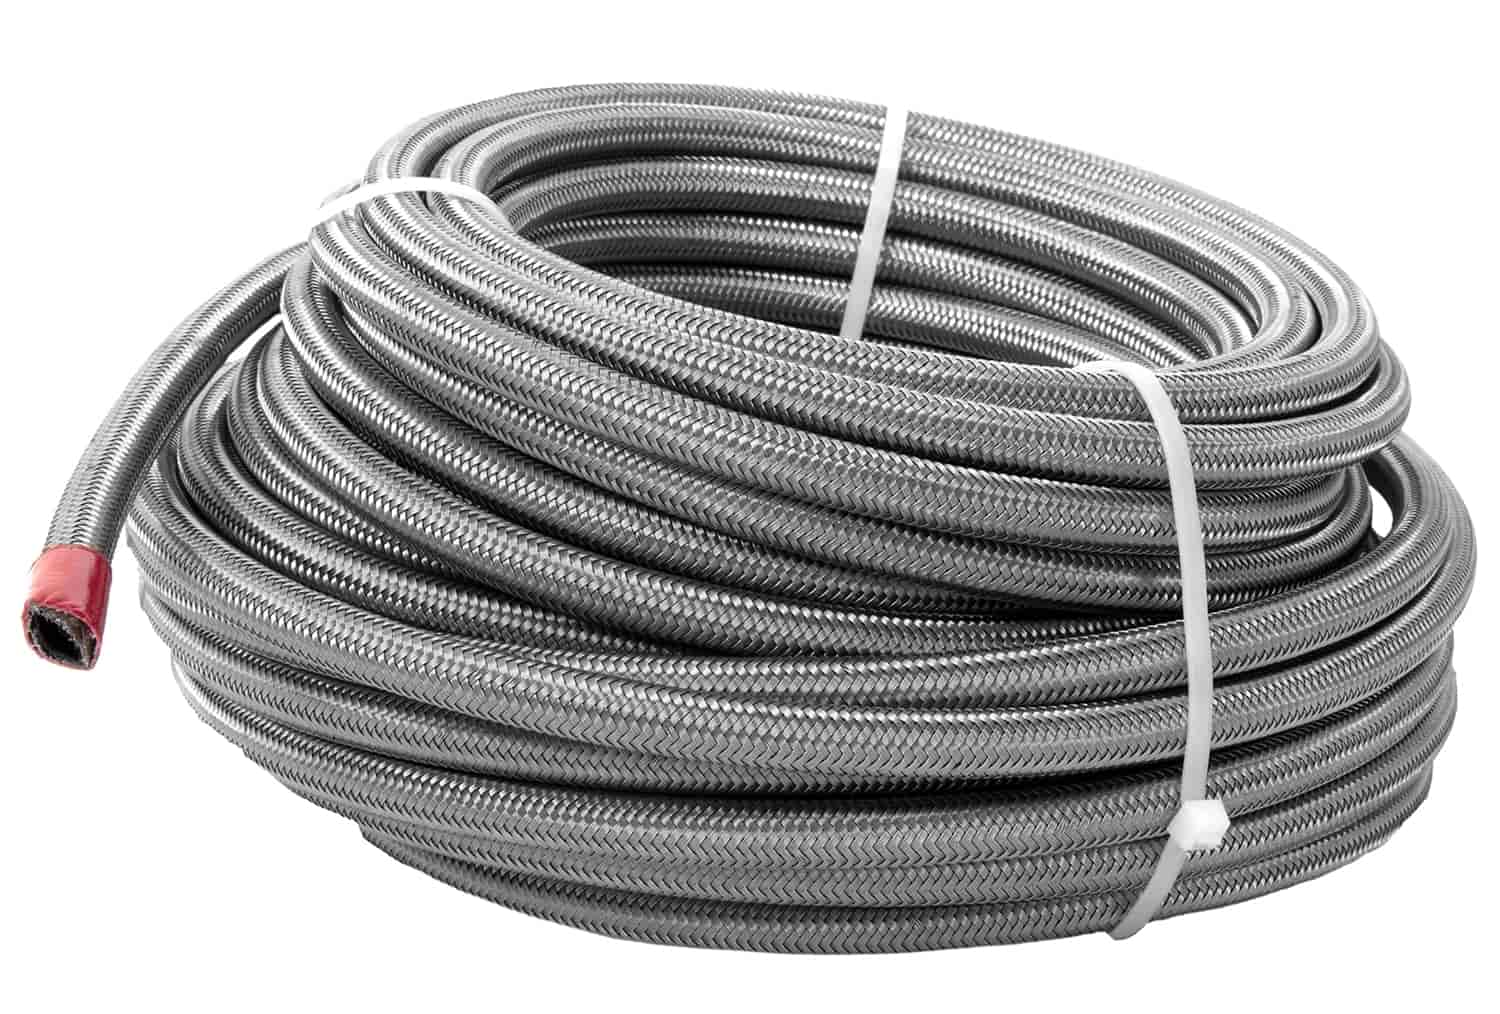 Braided Stainless Steel PTFE Fuel Hose -10 AN x 4 ft